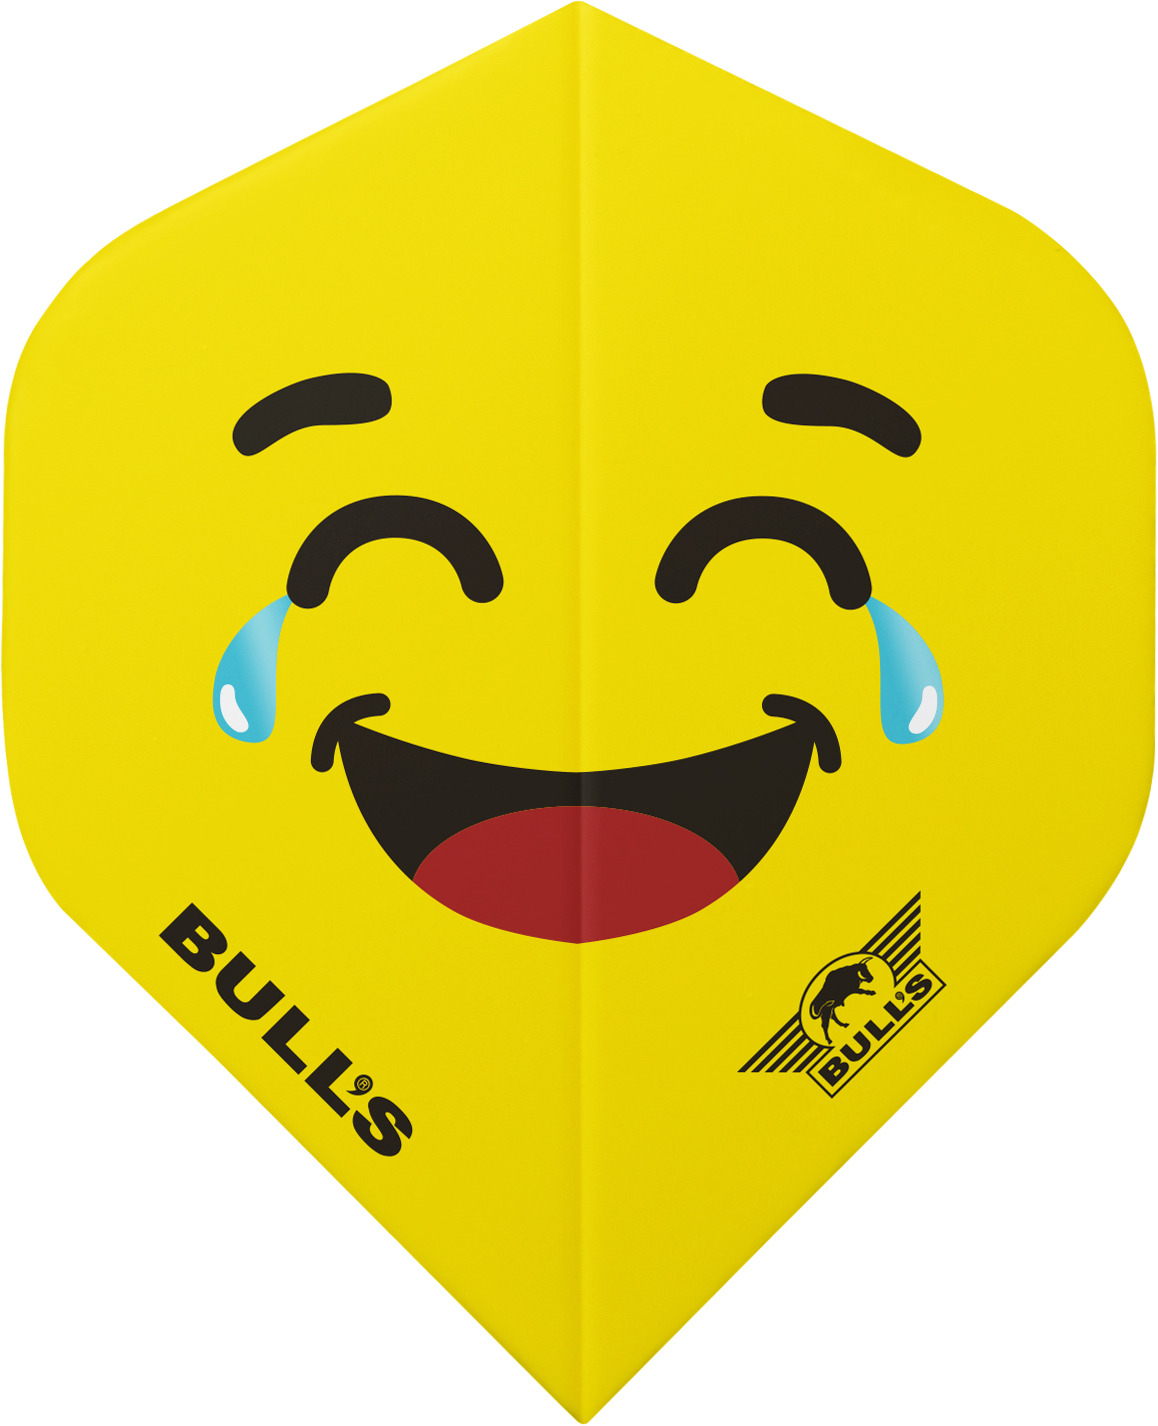 Bull's Smiley 100 Laugh Crying No.2